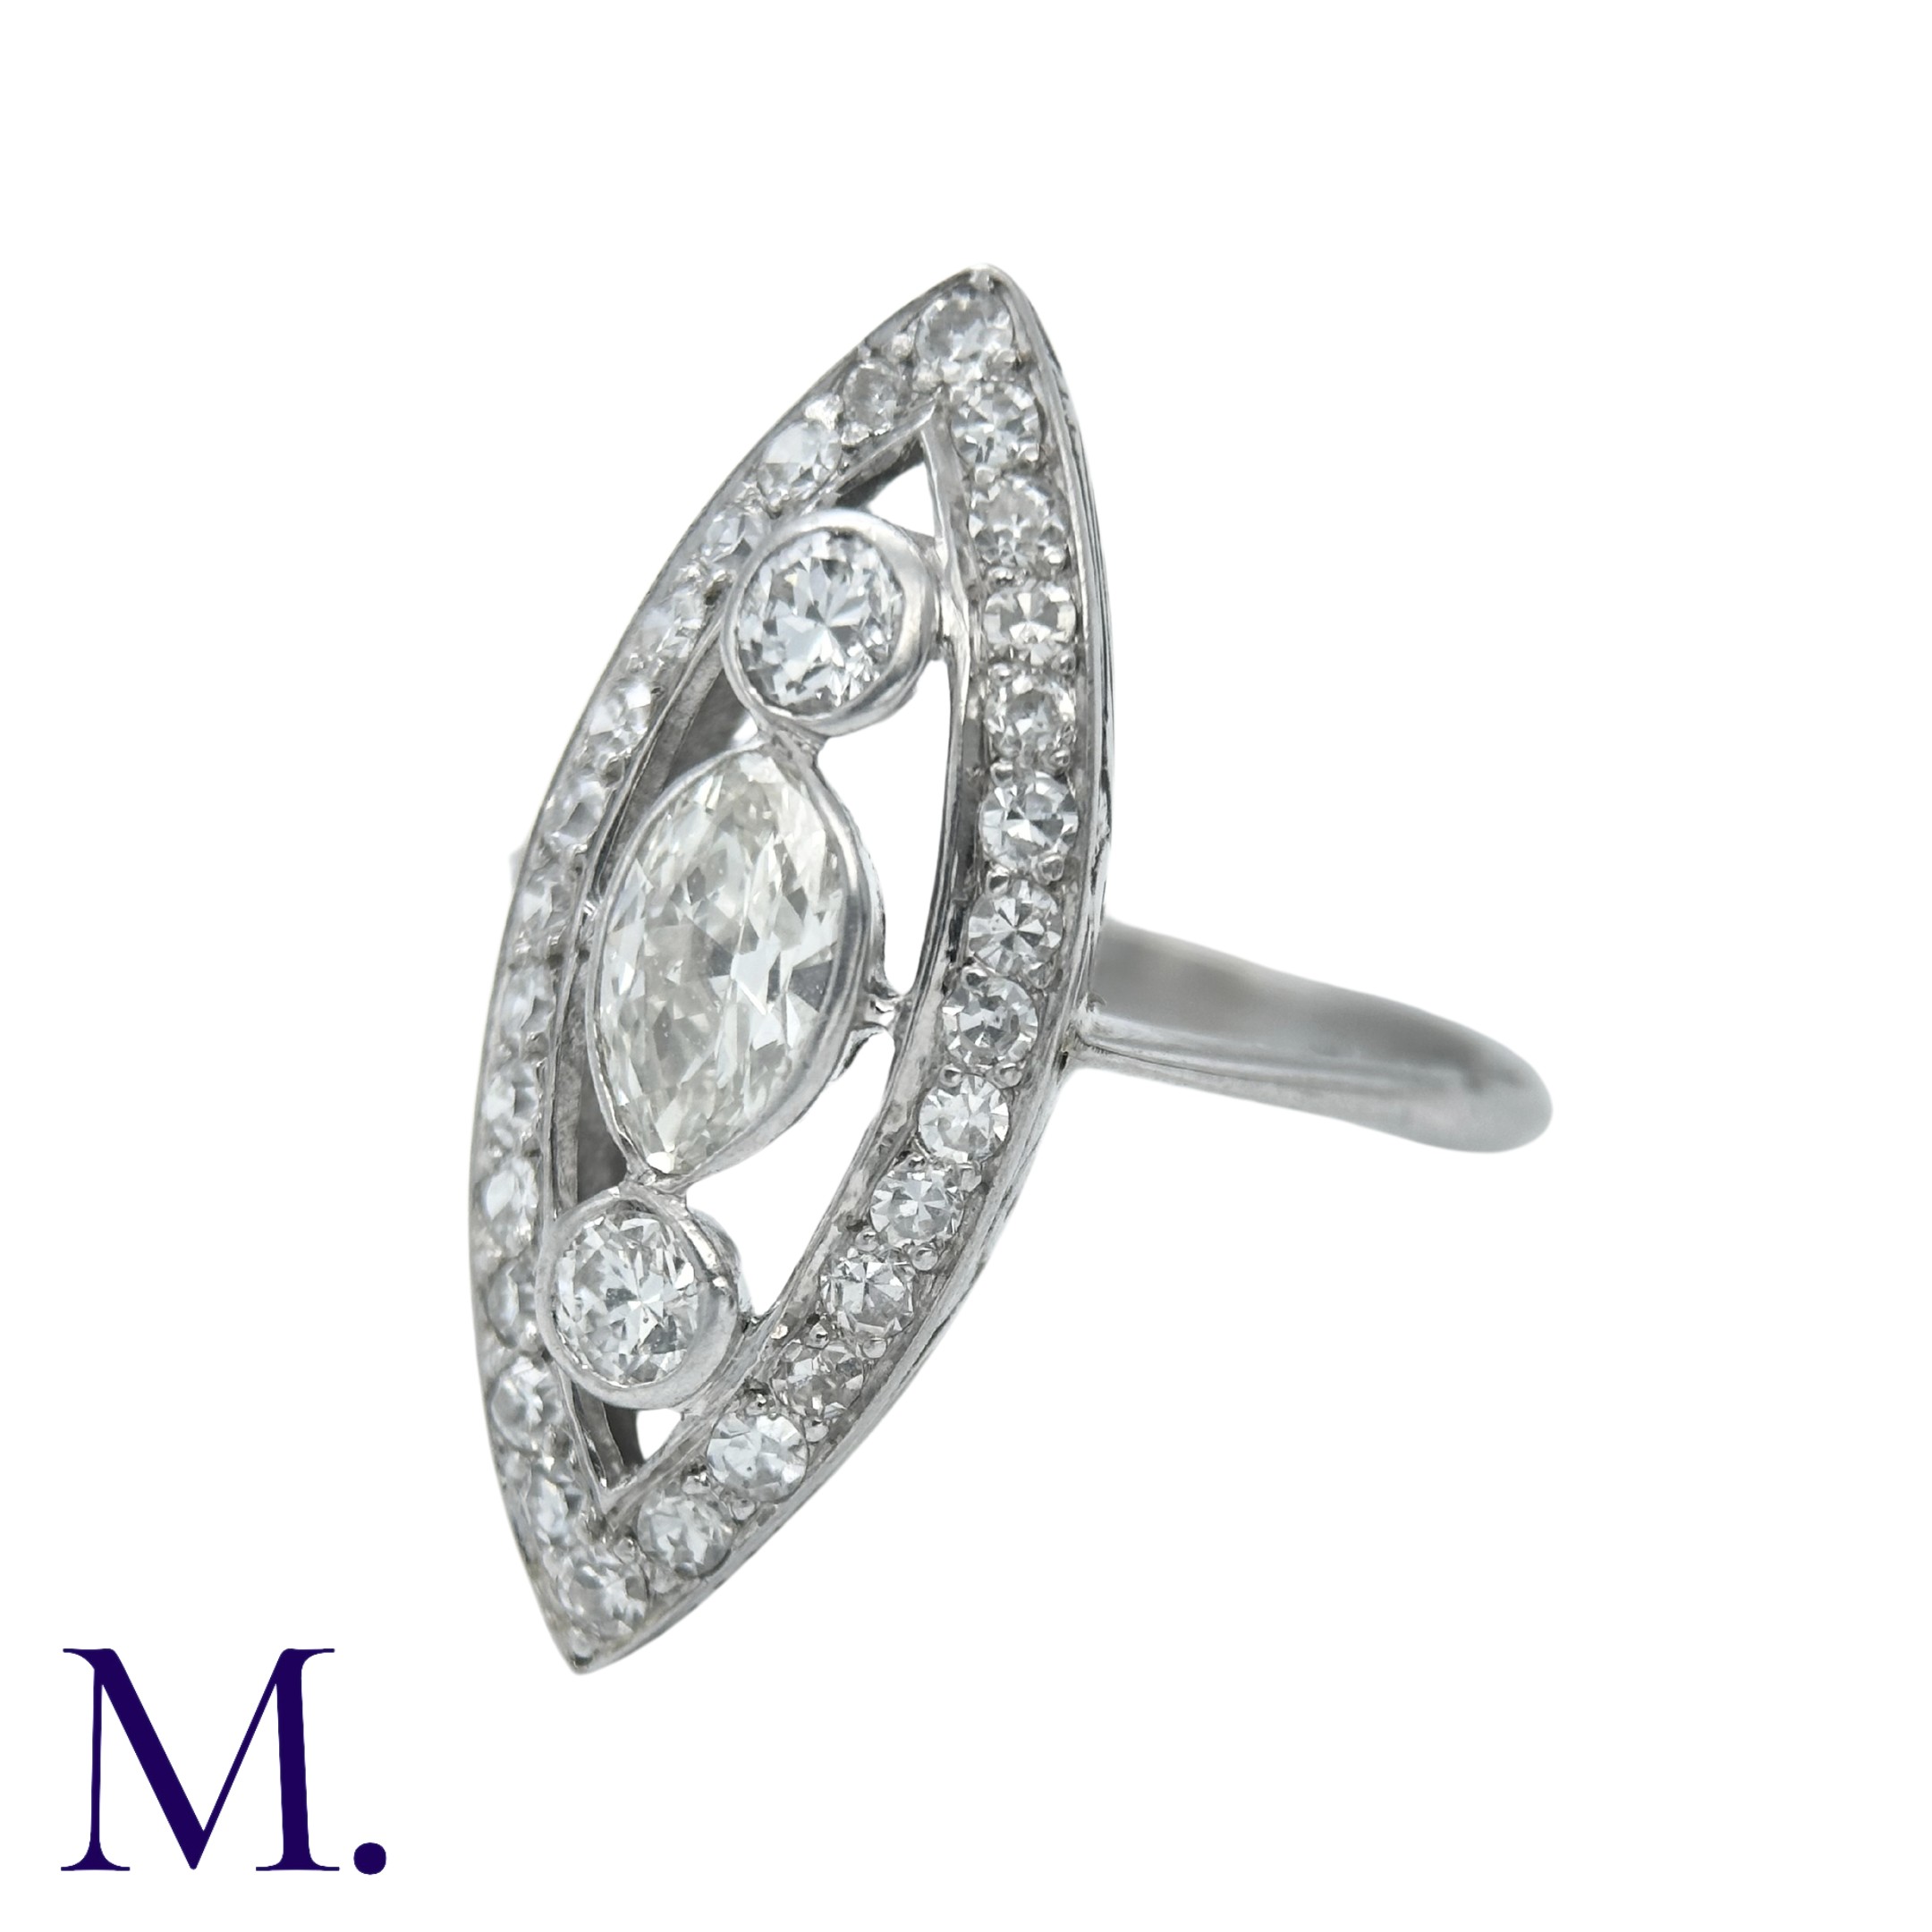 An Art Deco Diamond Ring in an openwork marquise shape with two principal round cut diamonds of - Image 6 of 6